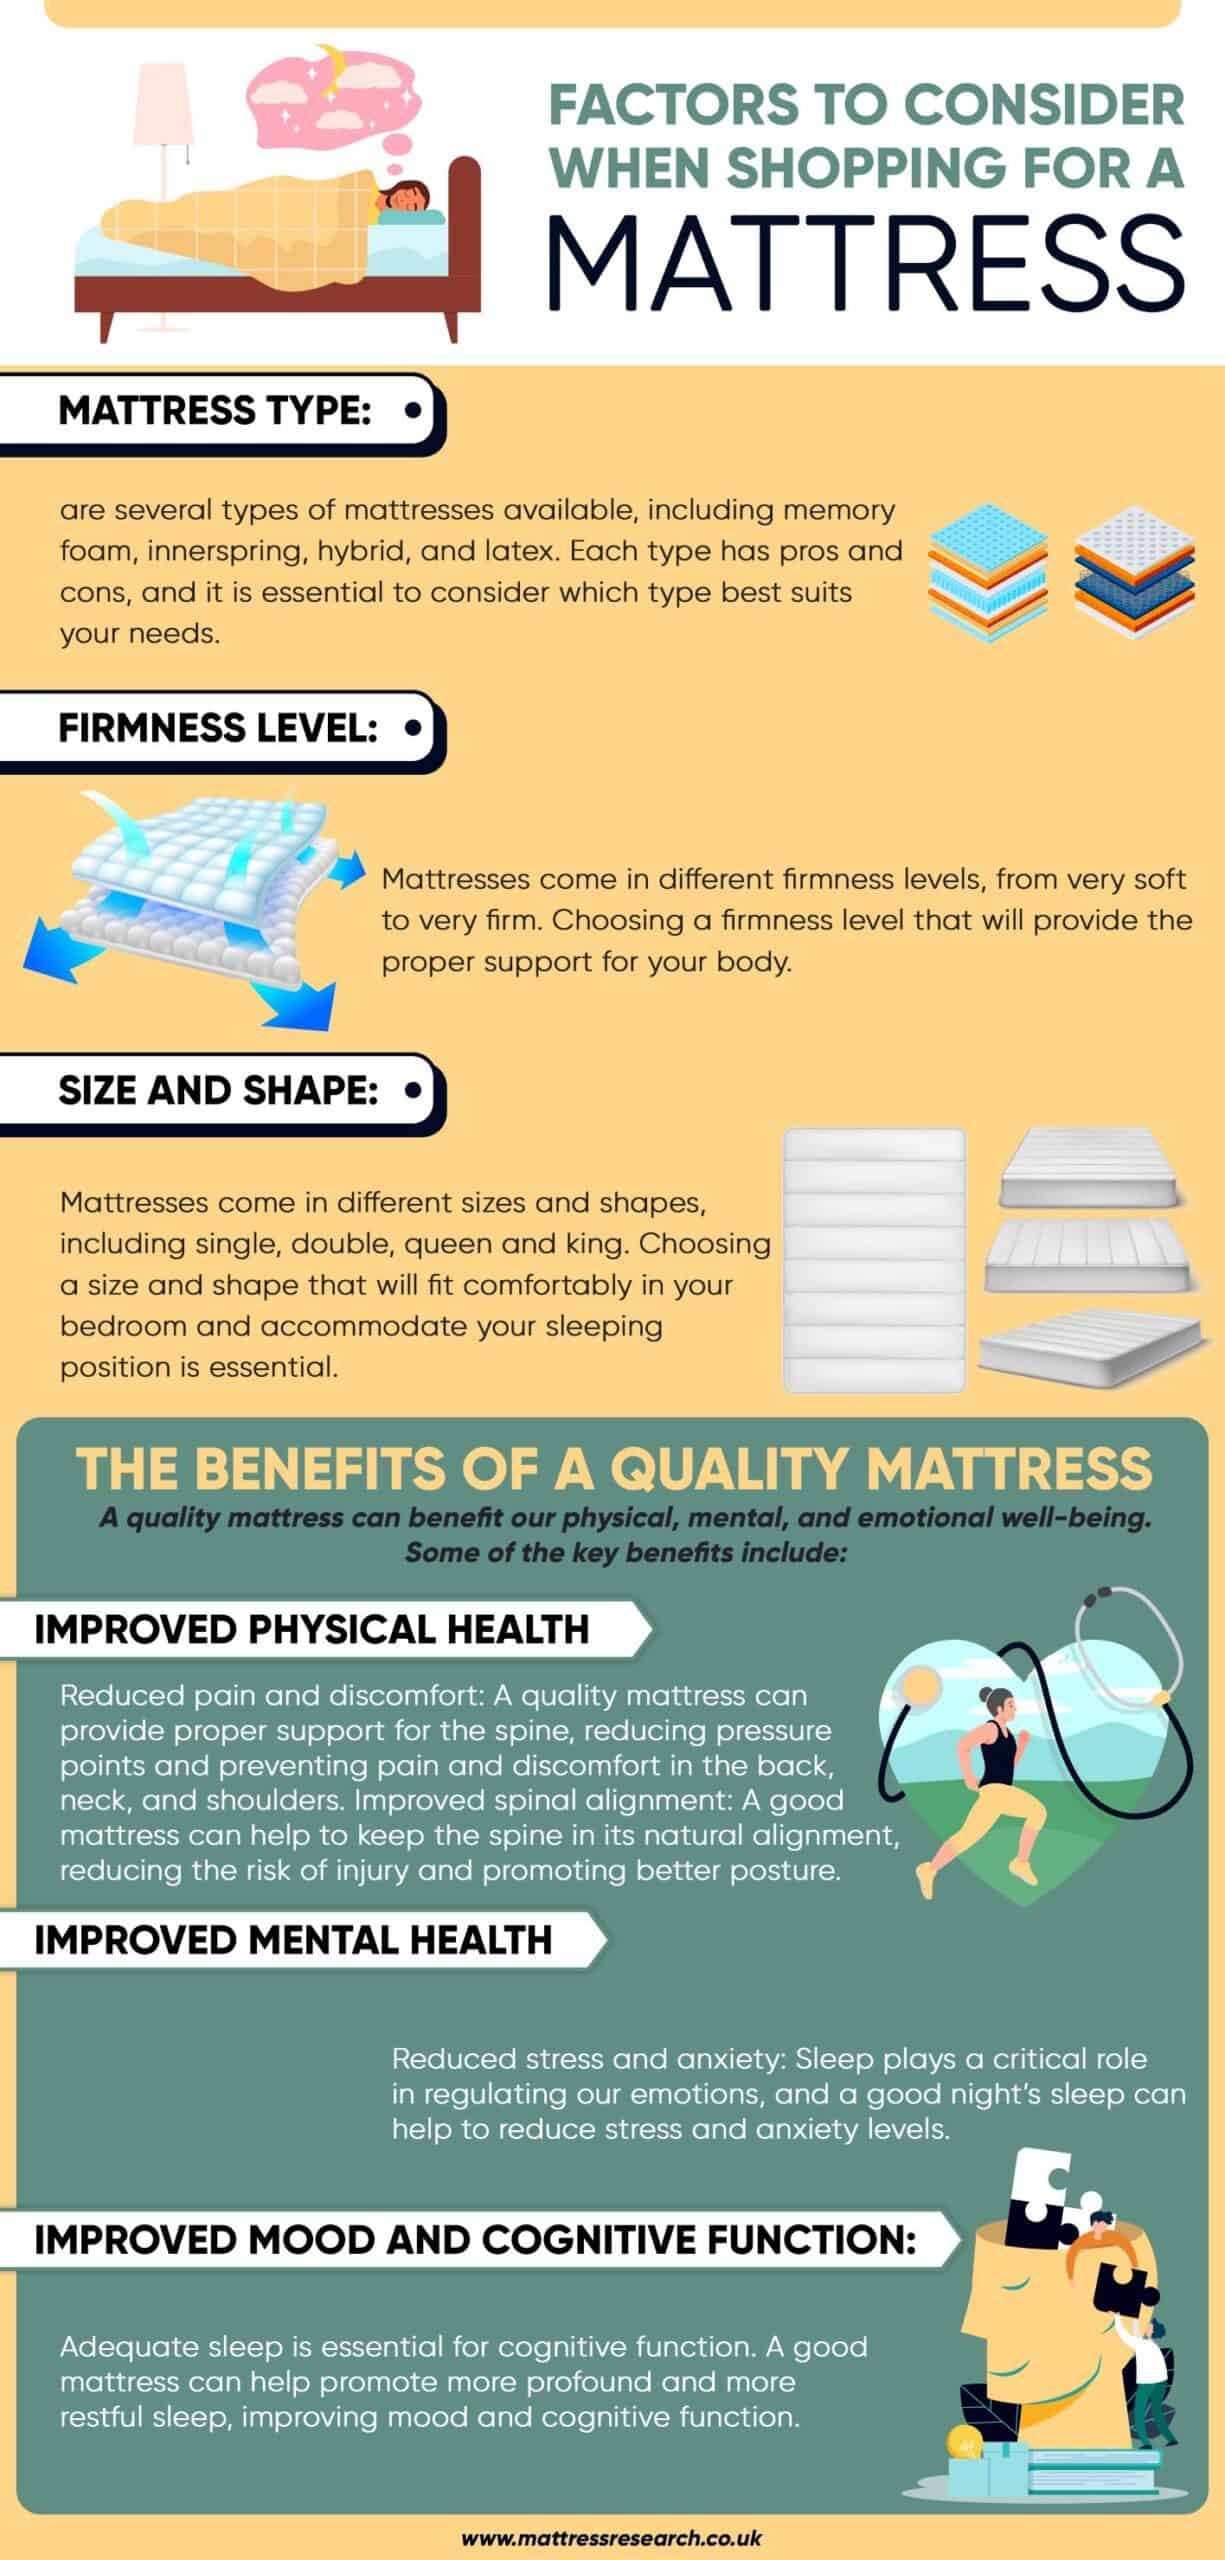 The Importance of sleep: How a quality mattress can improve your health